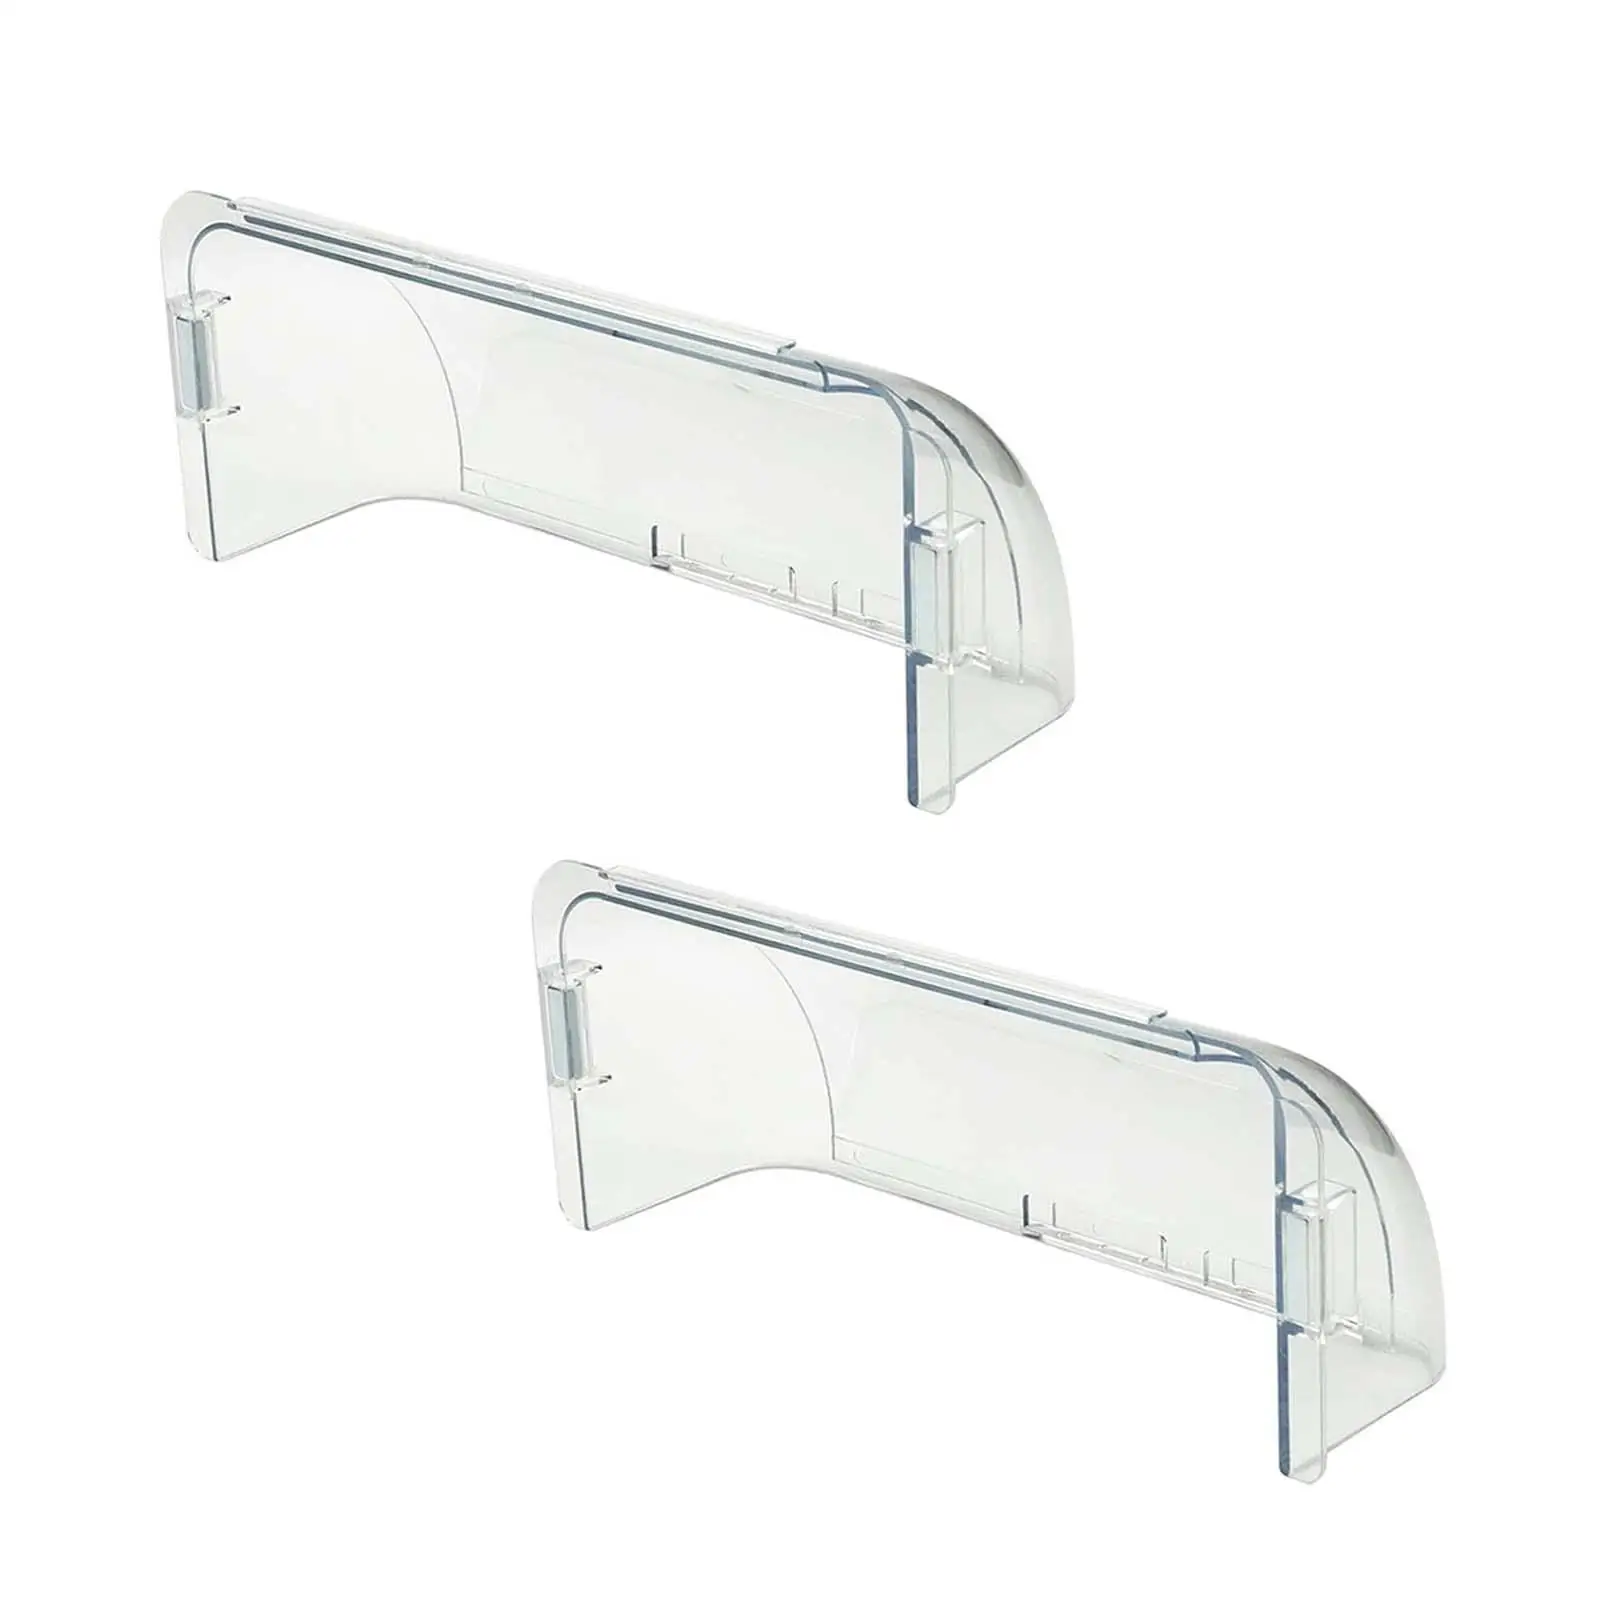 2x Unbreakable Adjustable Air Vent Deflector 9-14 Transparent Deflector Vent Covers for Heat Sidewall Ceiling Registers